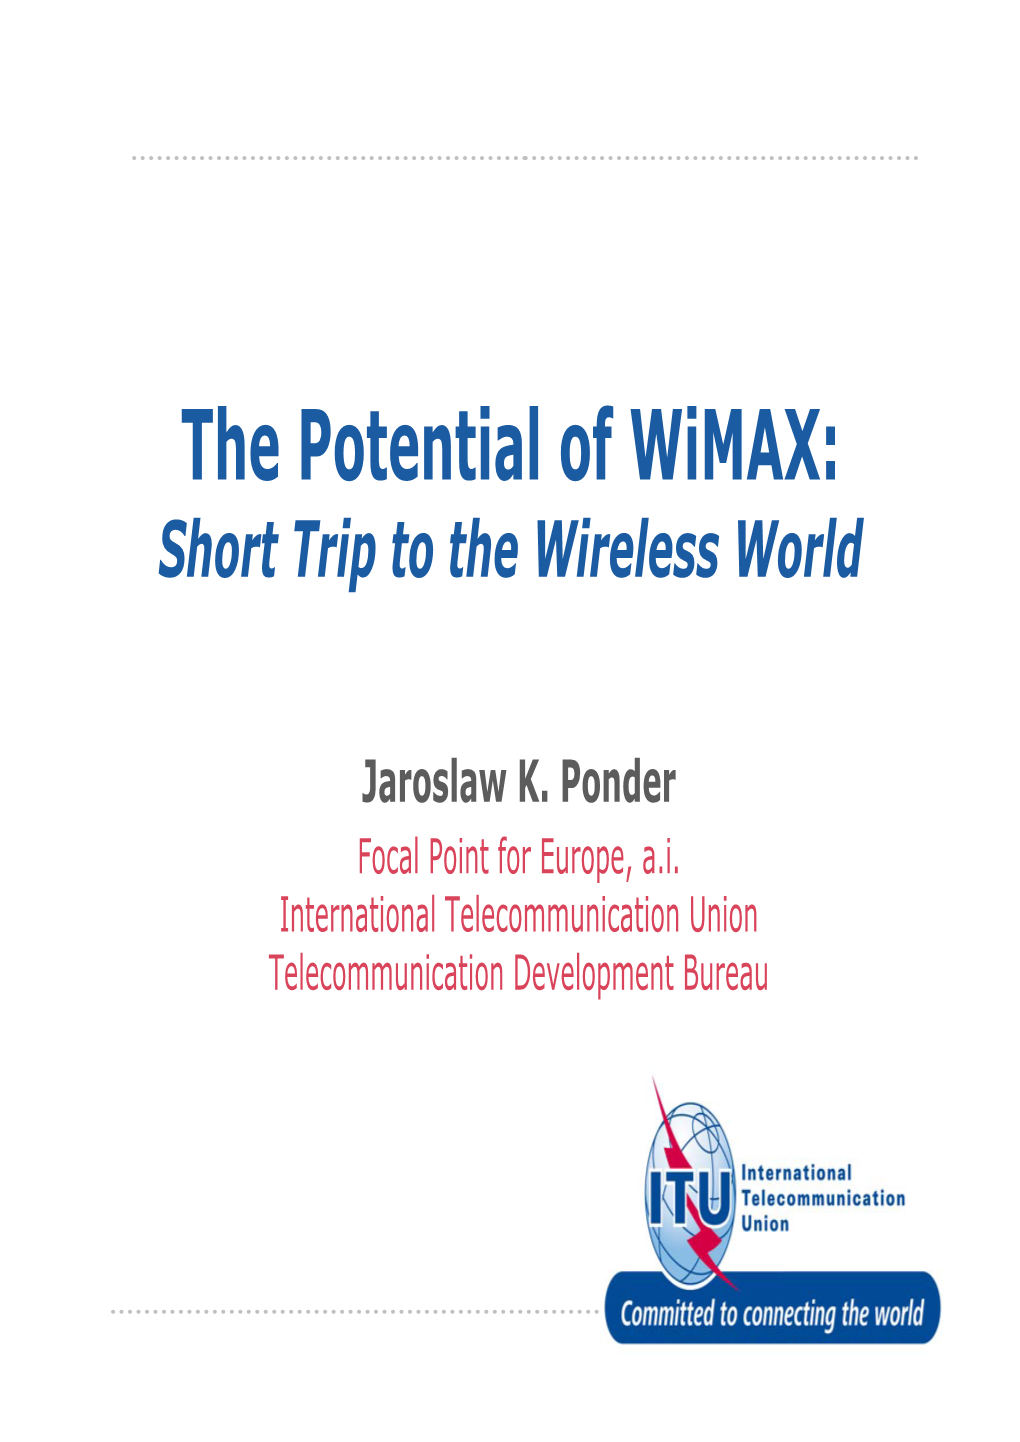 The Potential of Wimax: Short Trip to the Wireless World